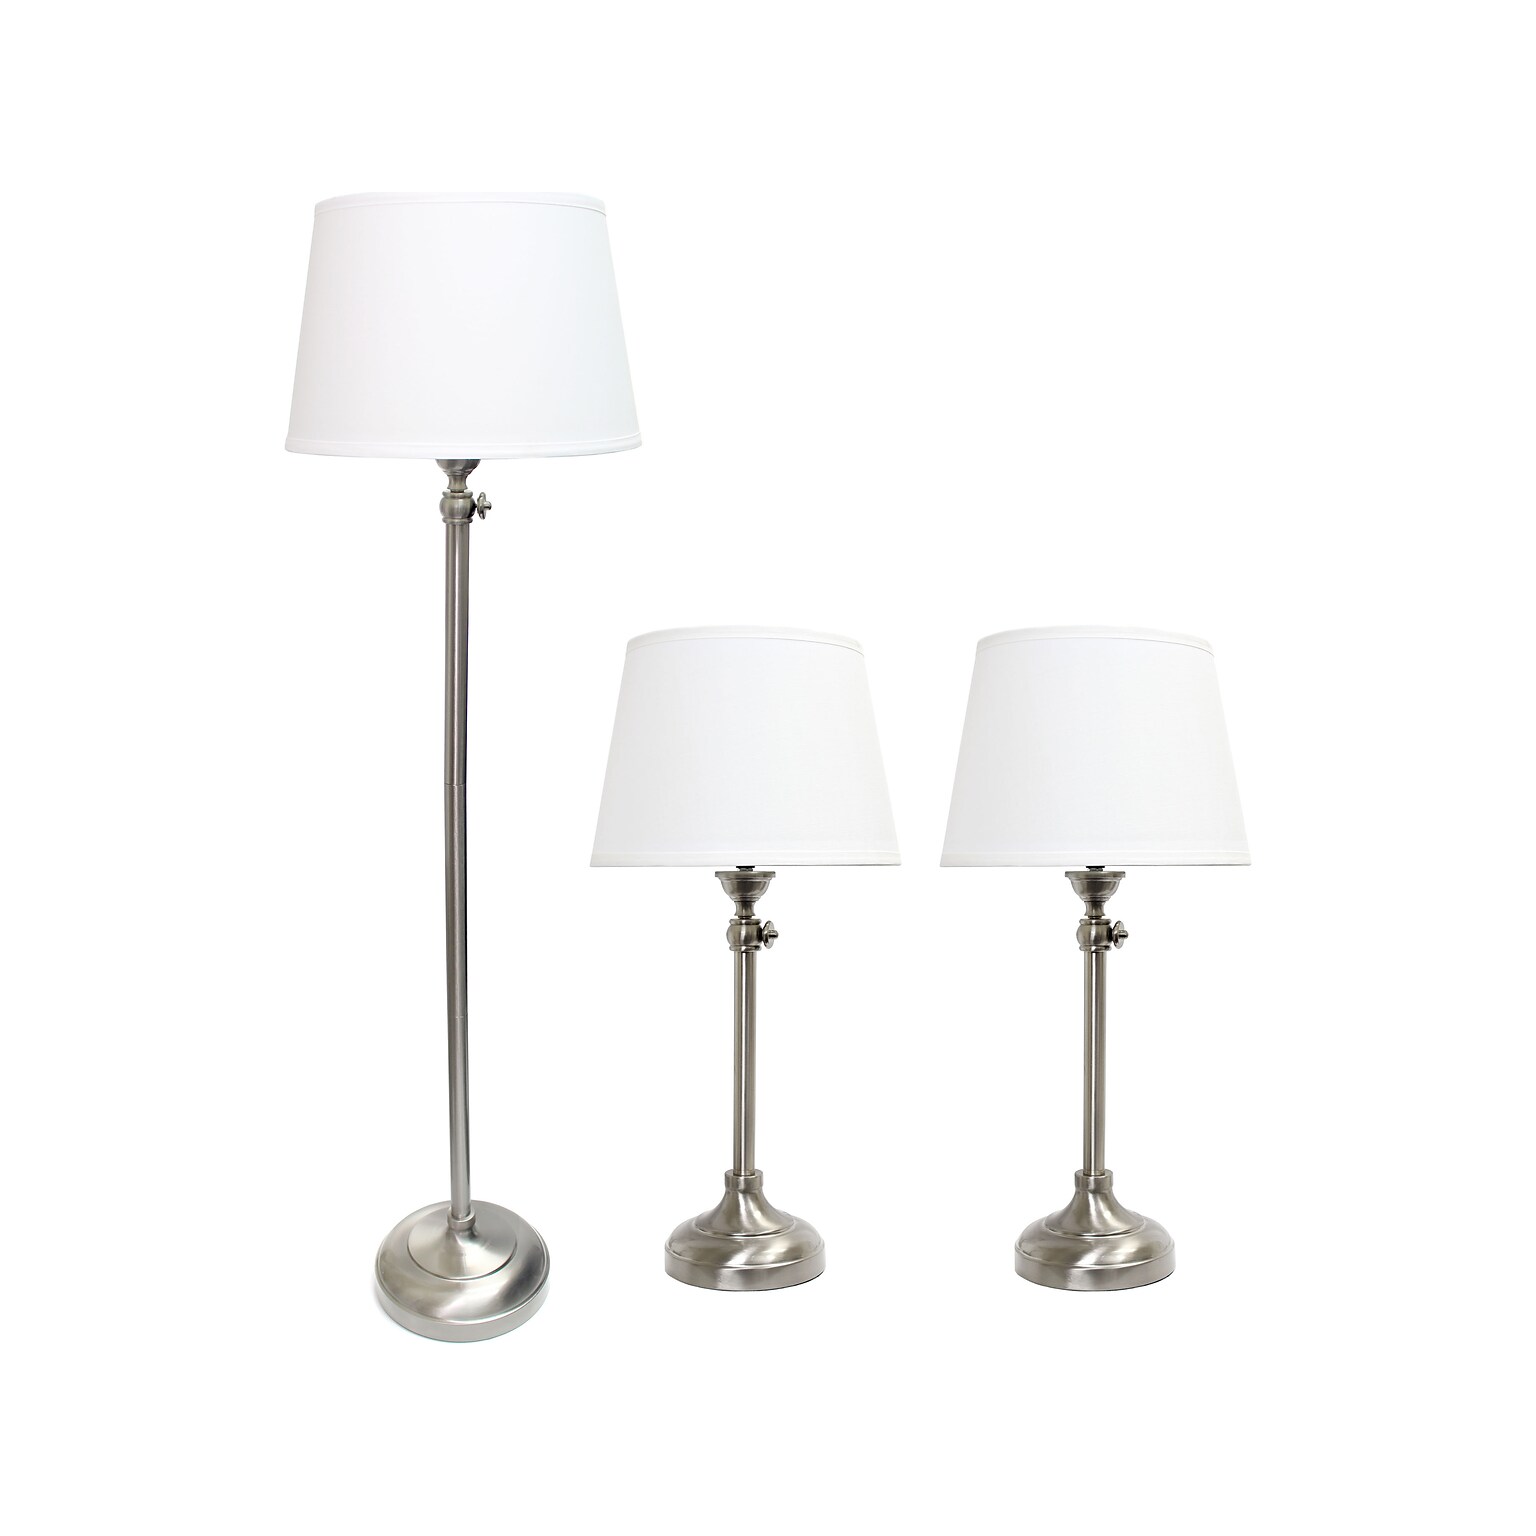 Lalia Home Perennial 58.5/30 Brushed Nickel Three-Piece Floor/Table Lamp Set with Tapered Shades (LHS-1005-BN)